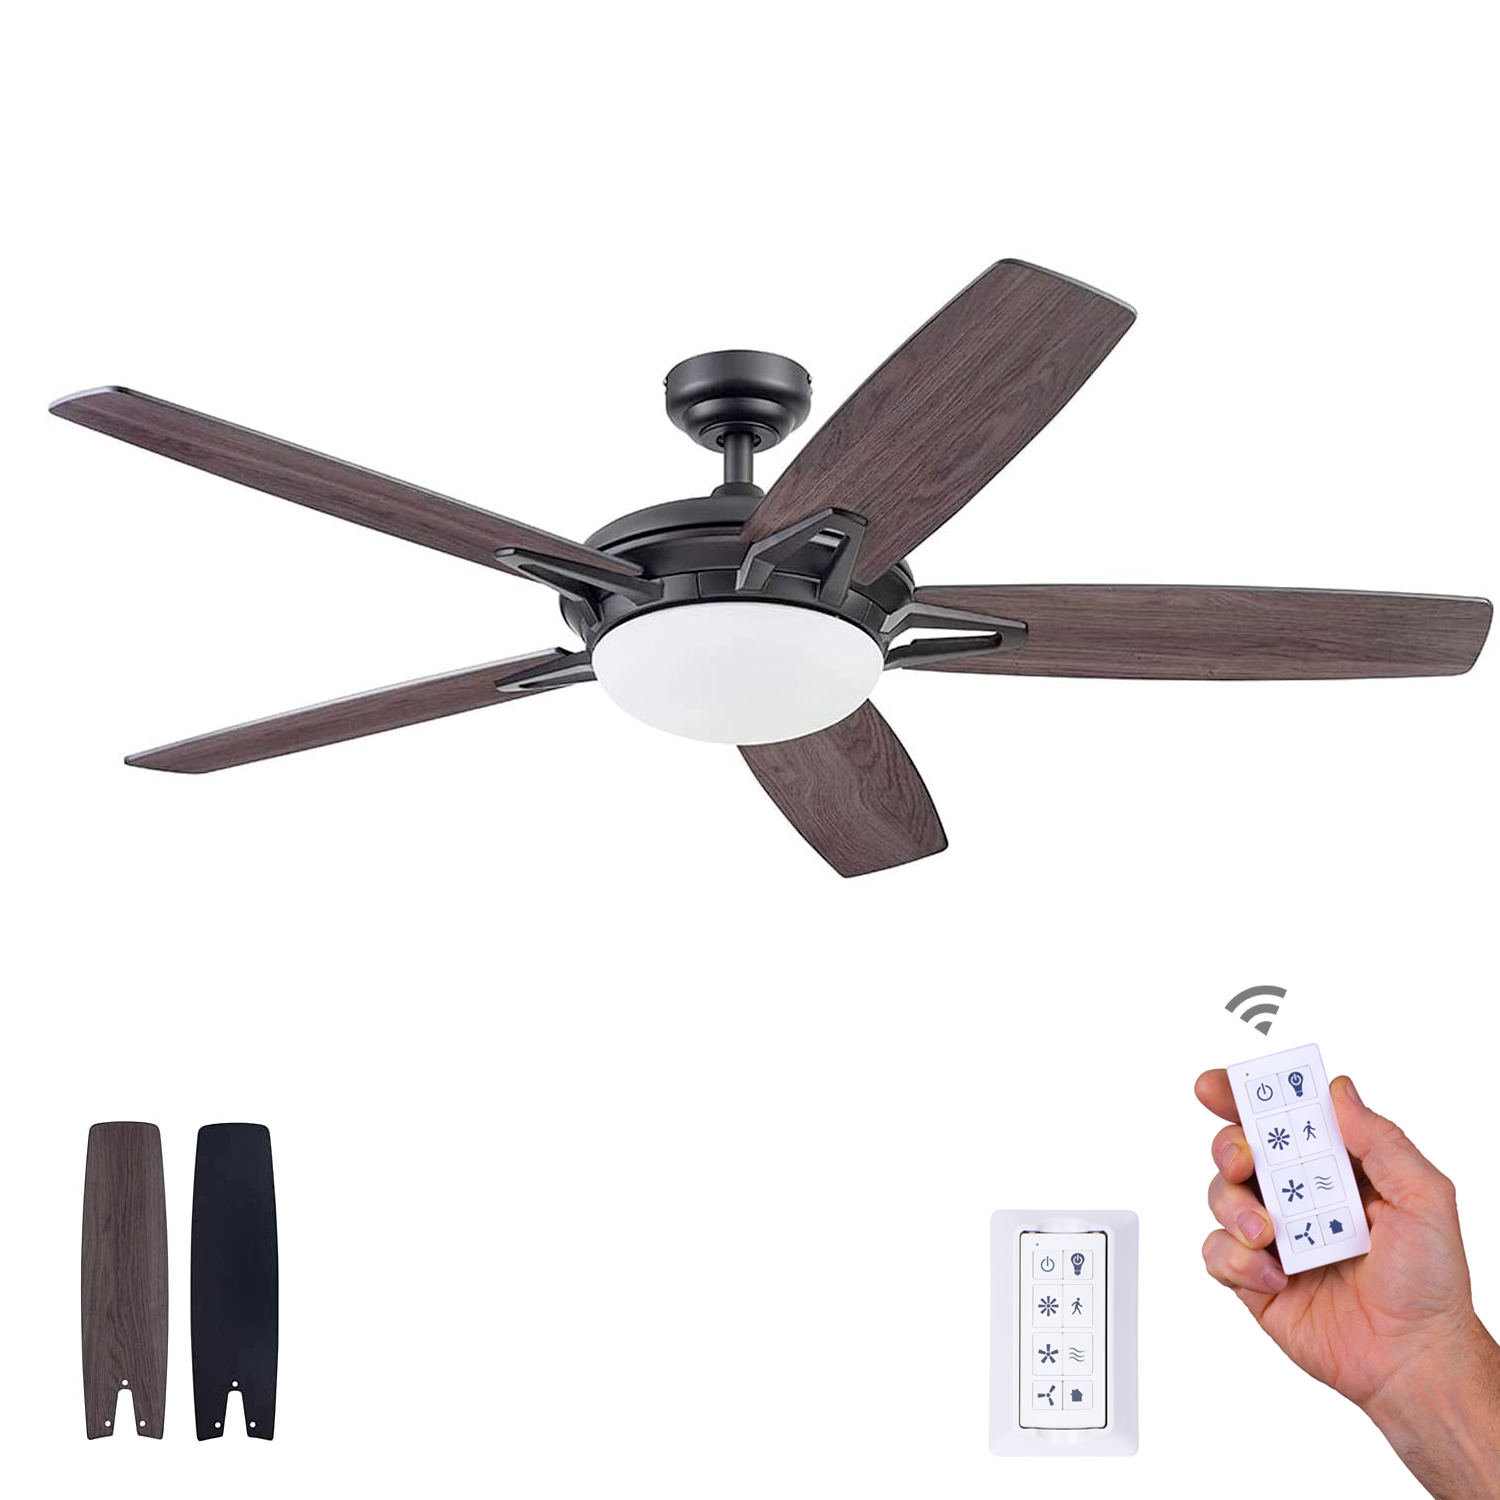 Home Decorators Collection Ashby Park 52 in. Integrated LED Brushed Nickel Ceiling Fan with Light Kit and Remote Control Color Changing Tech - 3